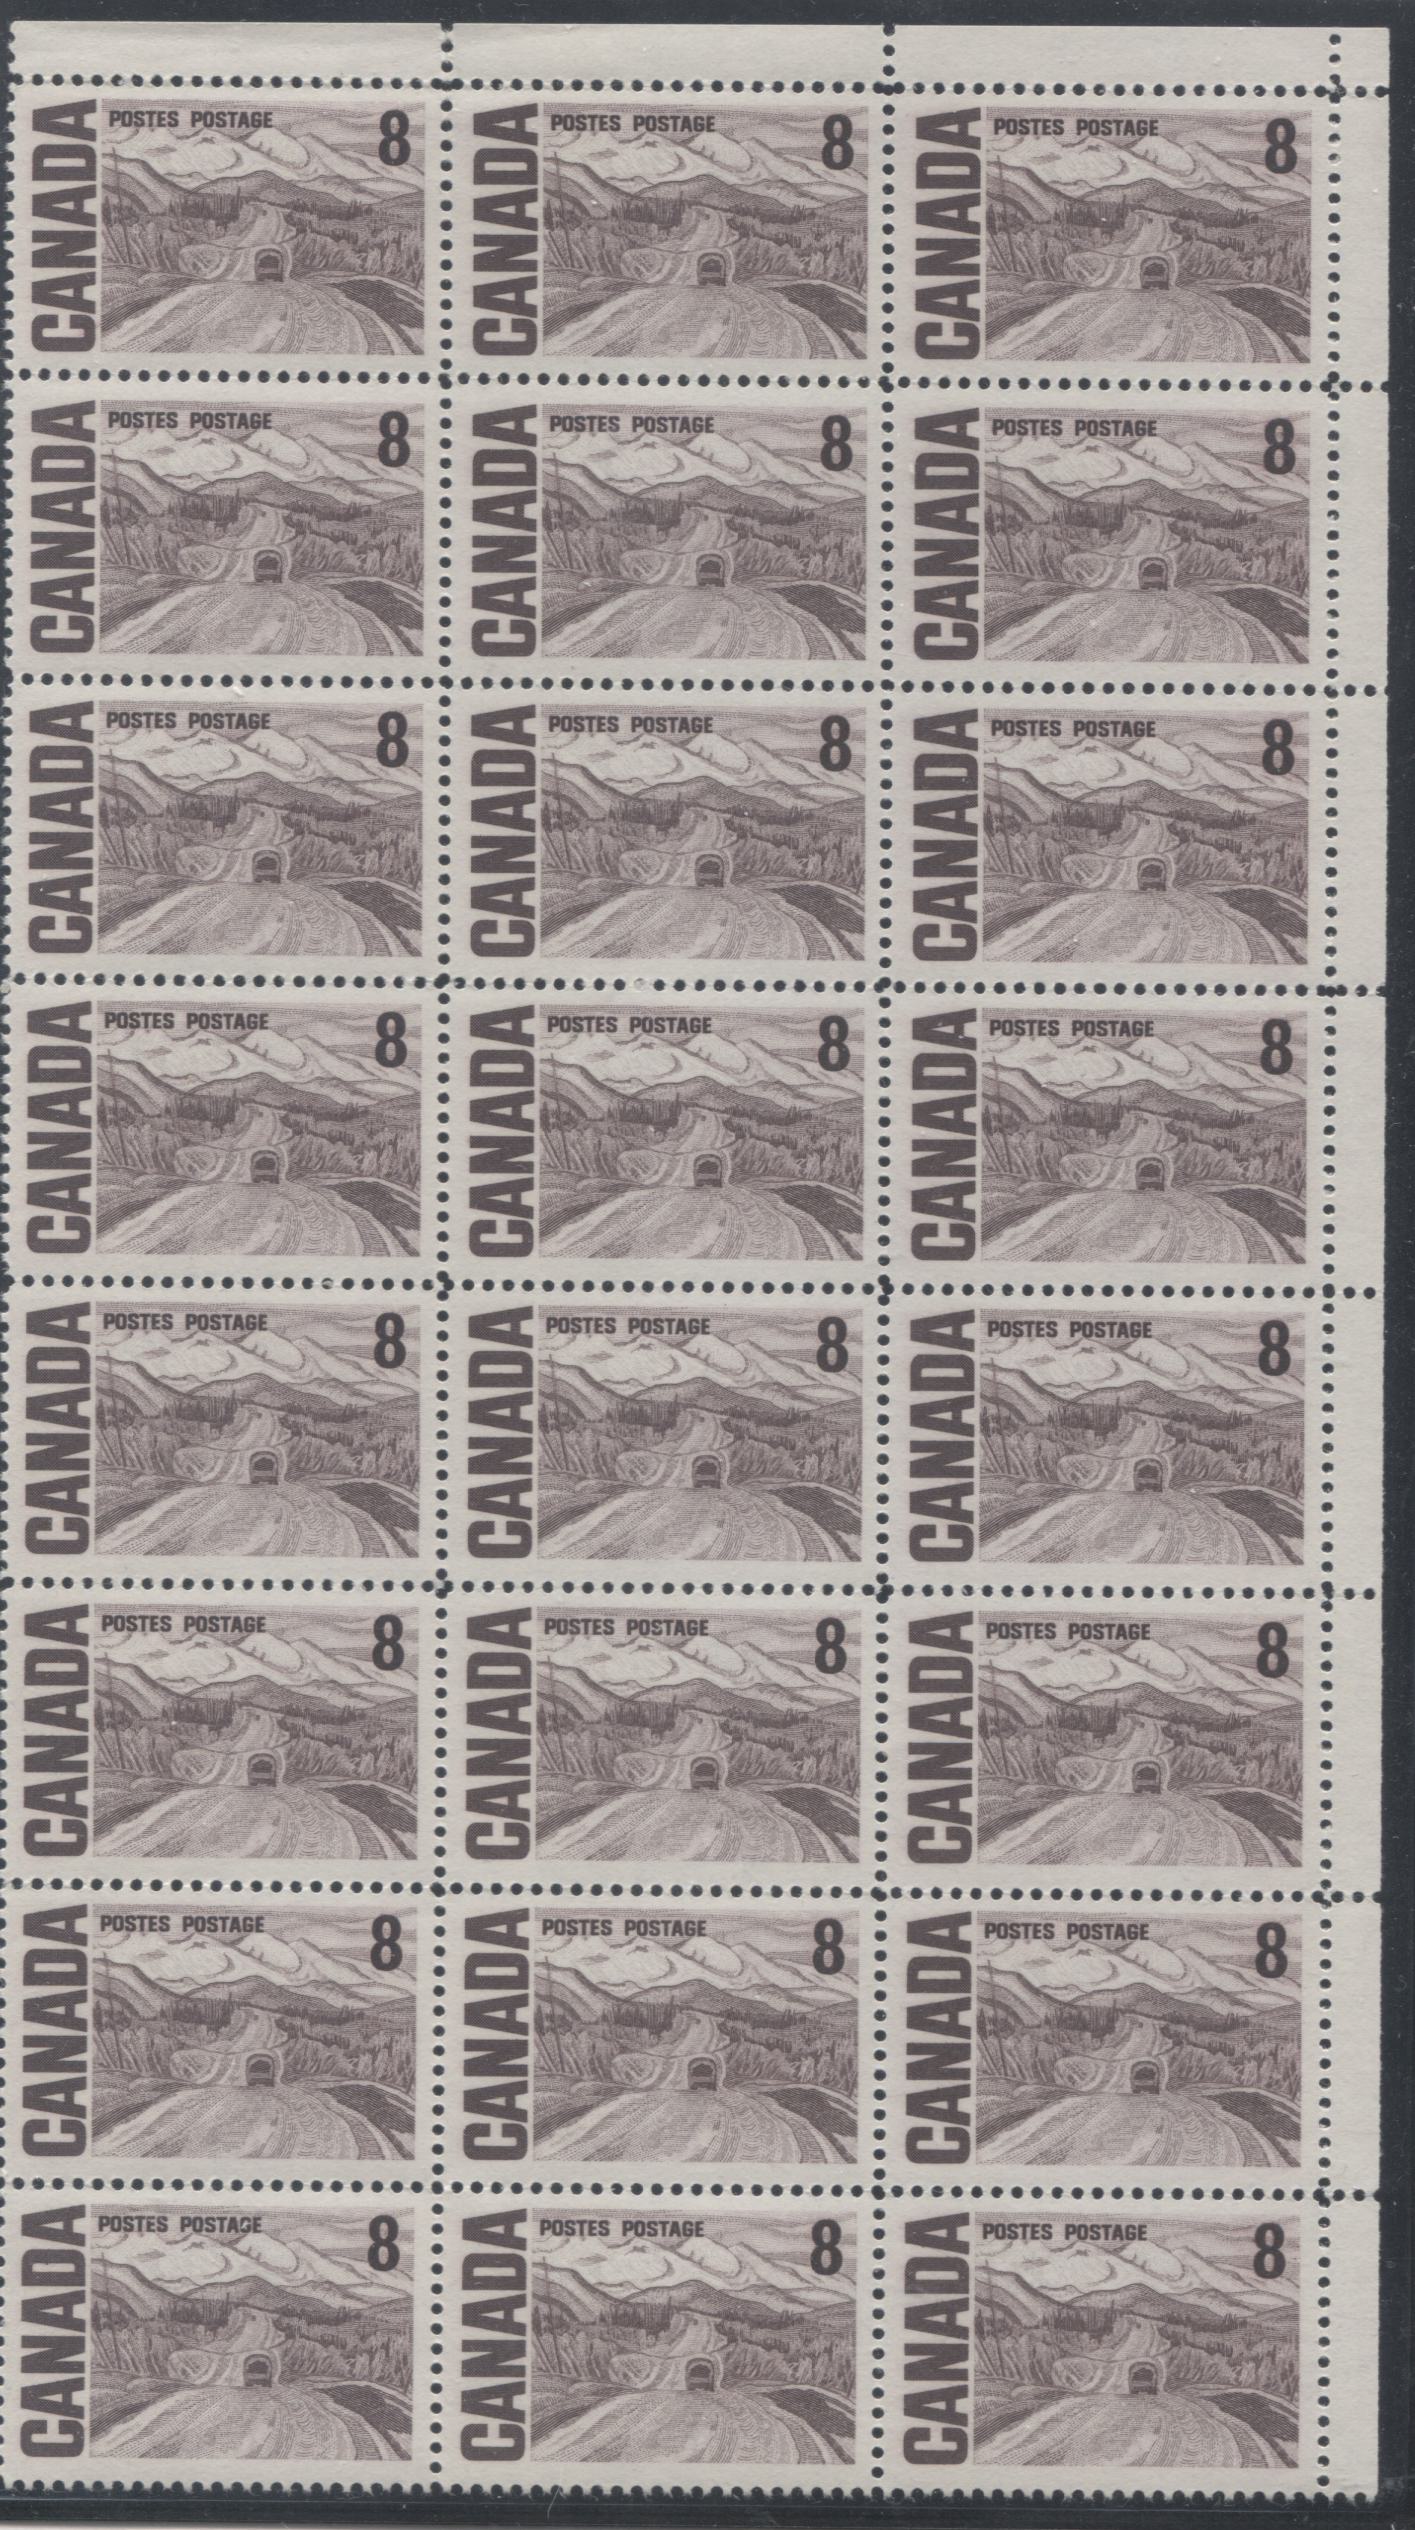 Canada #461iii 8c Violet Brown Alaska Highway, 1967-1973 Centennial Definitive Issue, A UR Sheet Margin Block of 24 of the Plastic Flow Variety on DF Paper